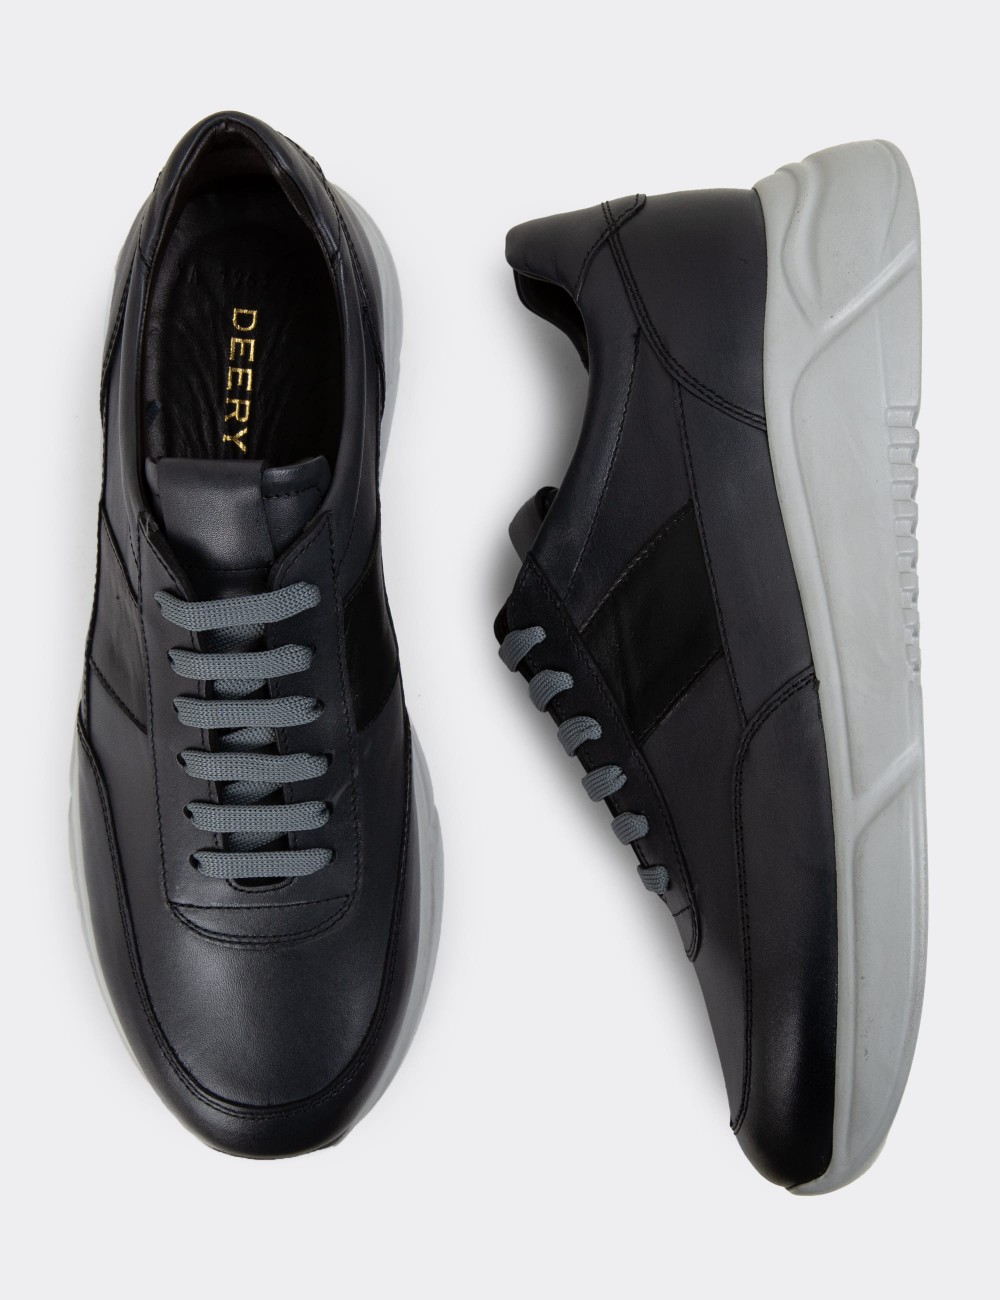 Gray Leather Sneakers - 01963MGRIE02